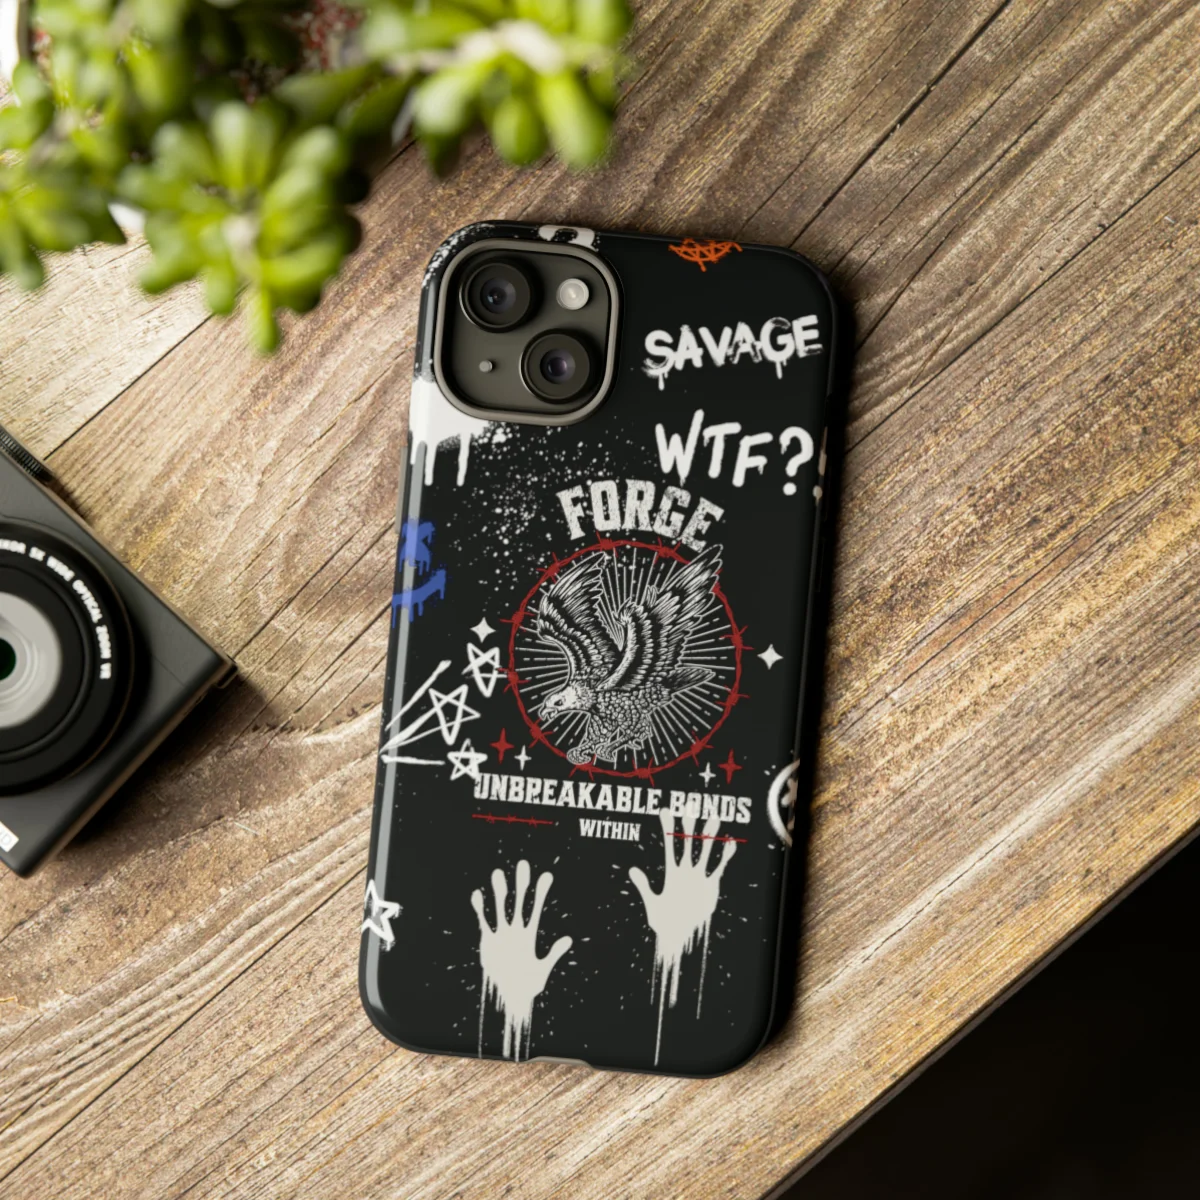 Forge Unbreakable Bonds Within Graffiti Inspirational Graphics Cell Phone Tough Cases